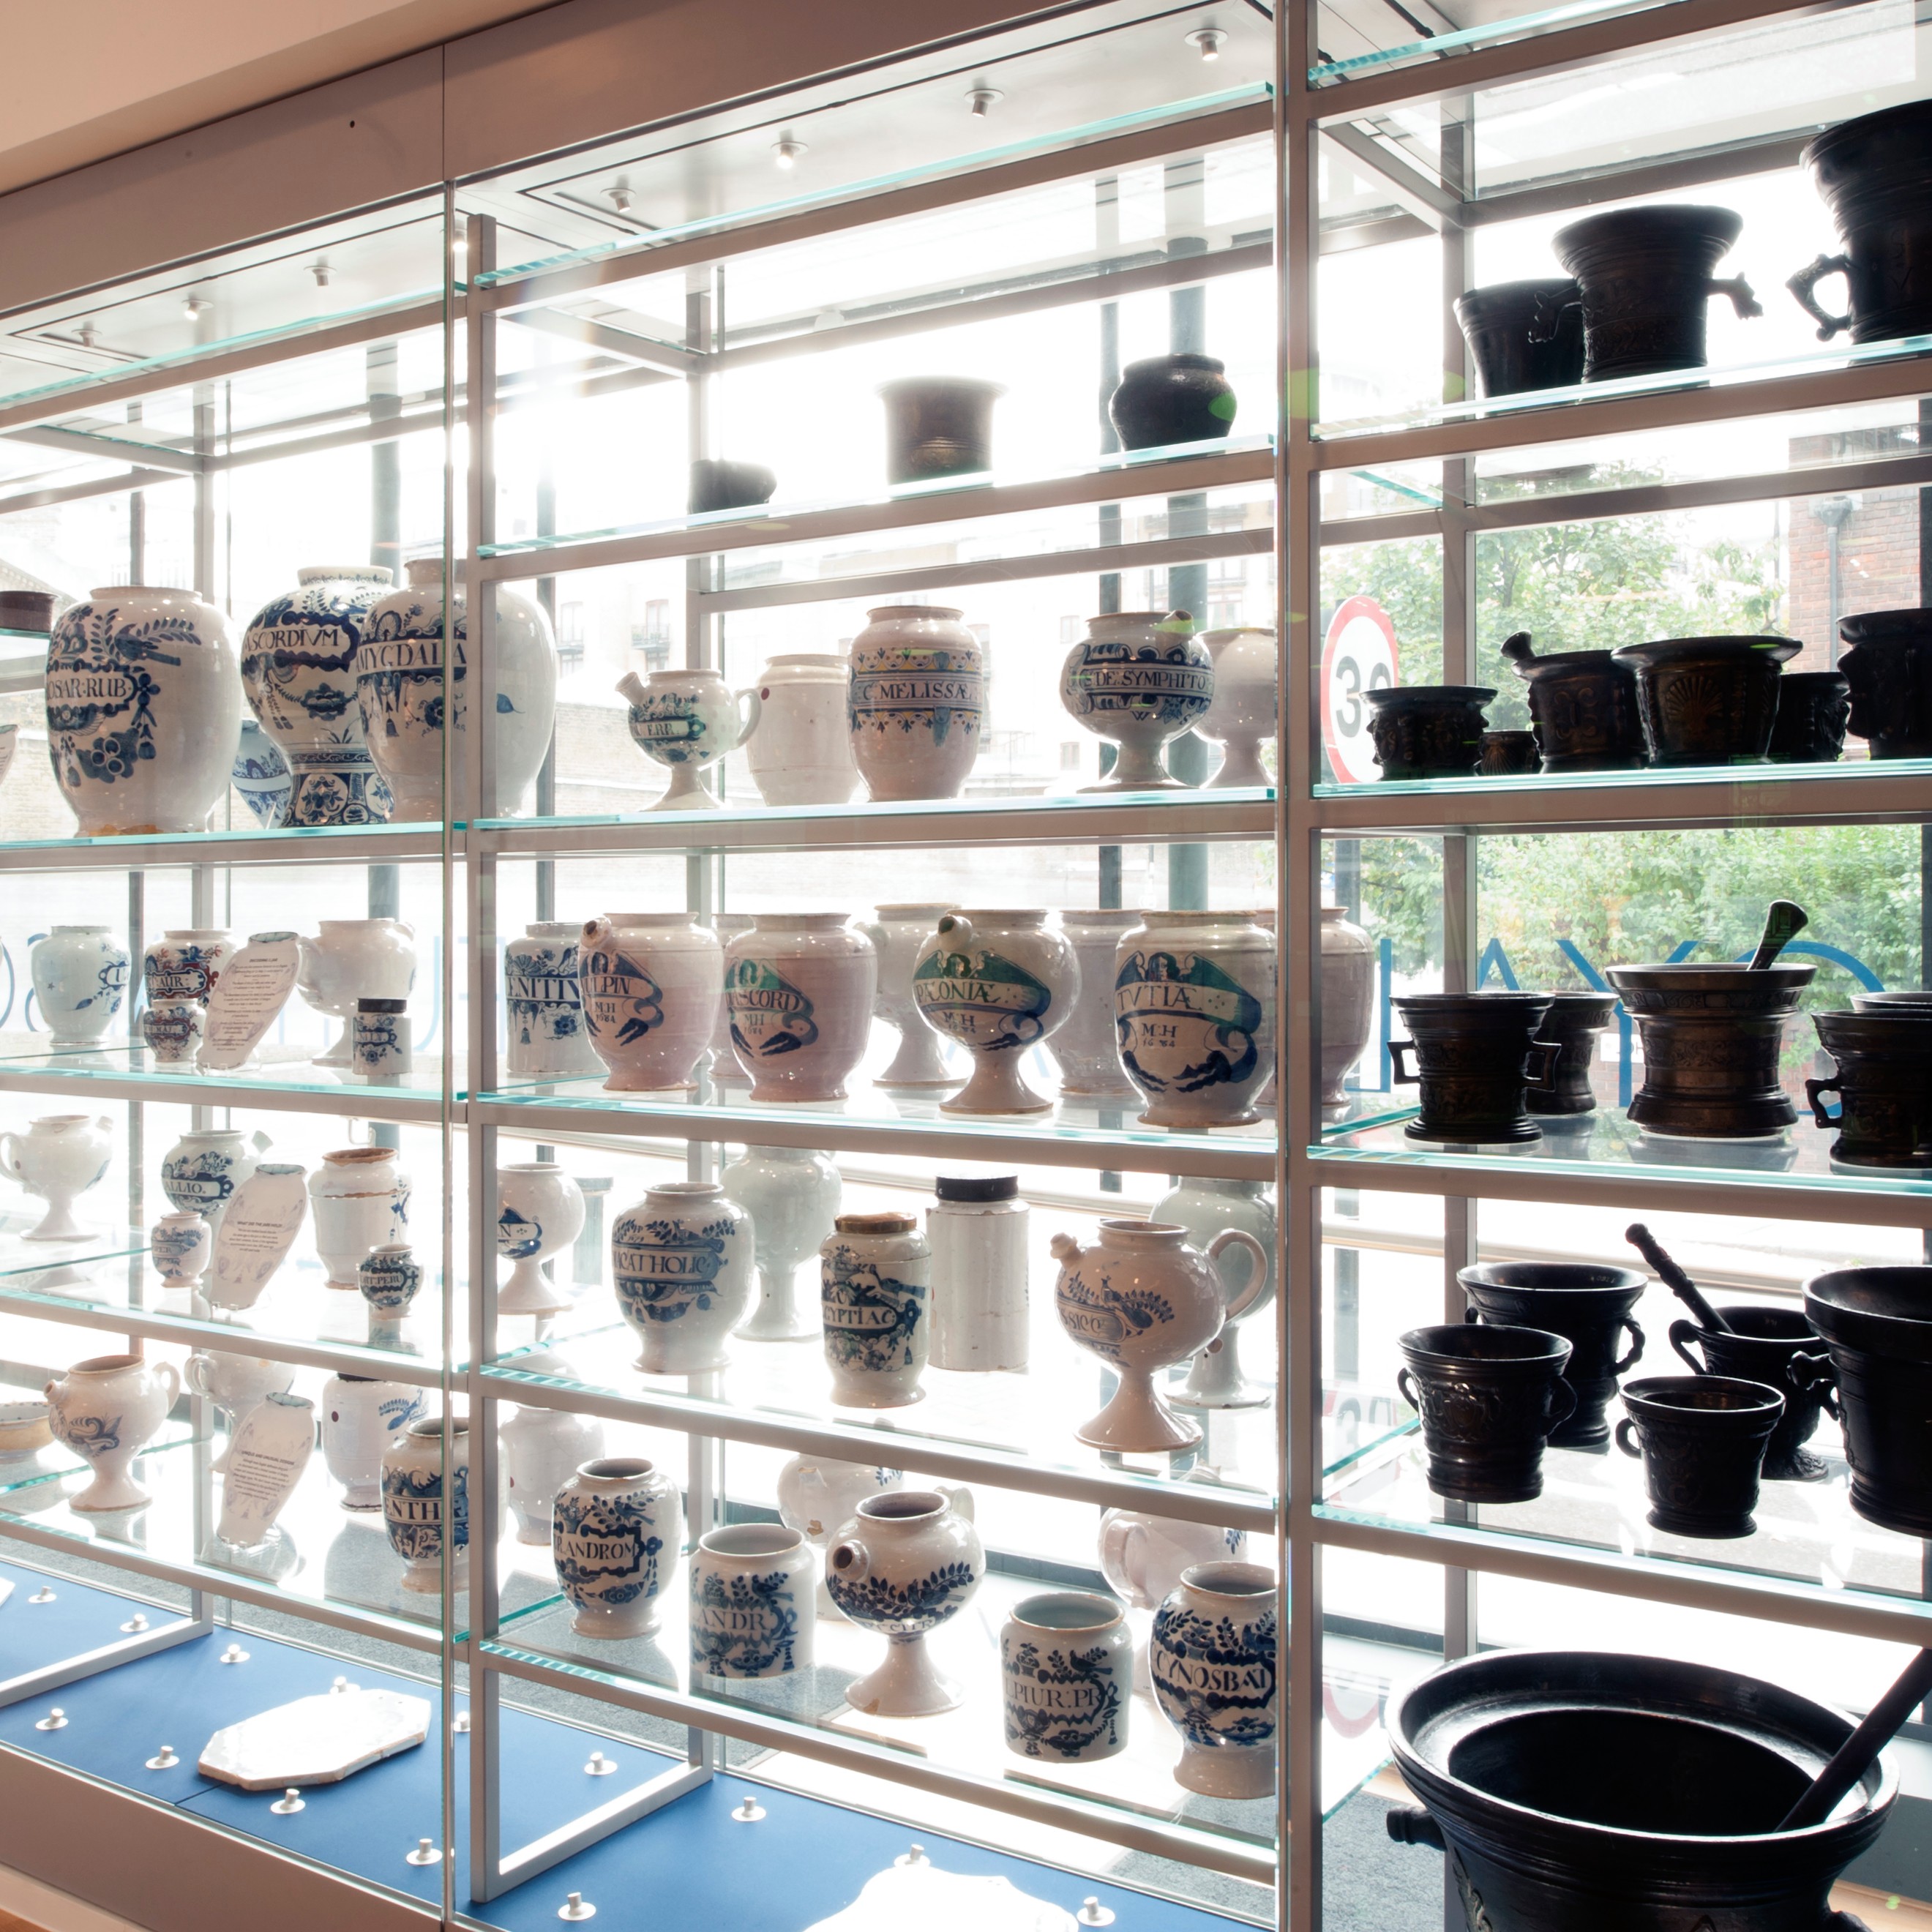 View of delftware apothecary jar display showing many shelfs of blue and white jars